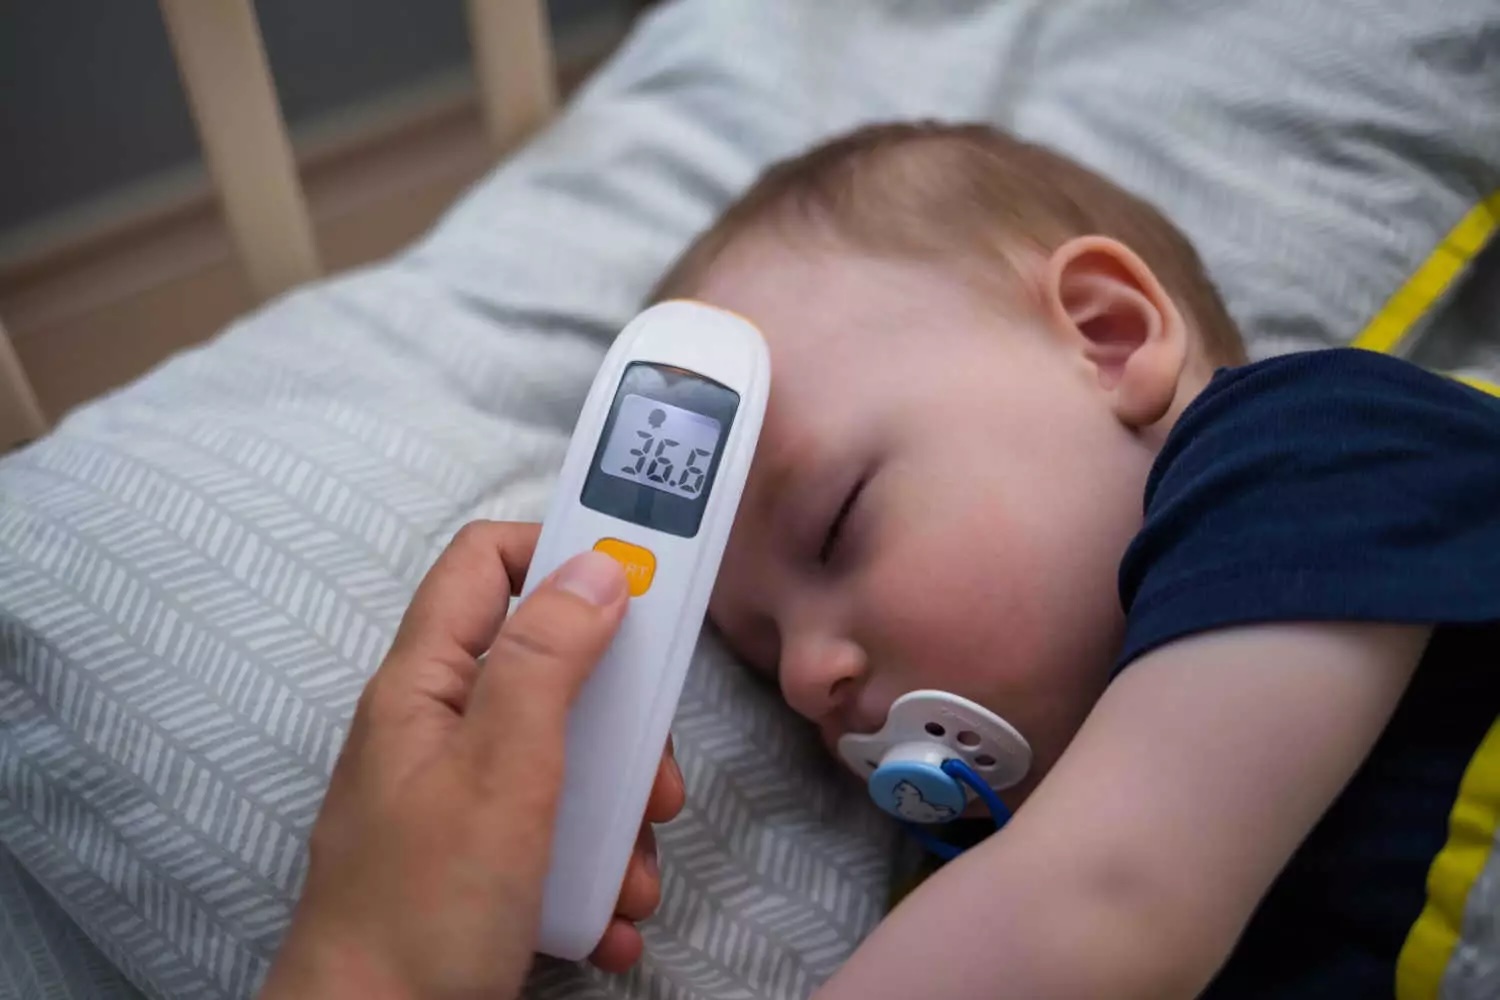 Review: Infant Digital Thermometer – Accurate and Reliable